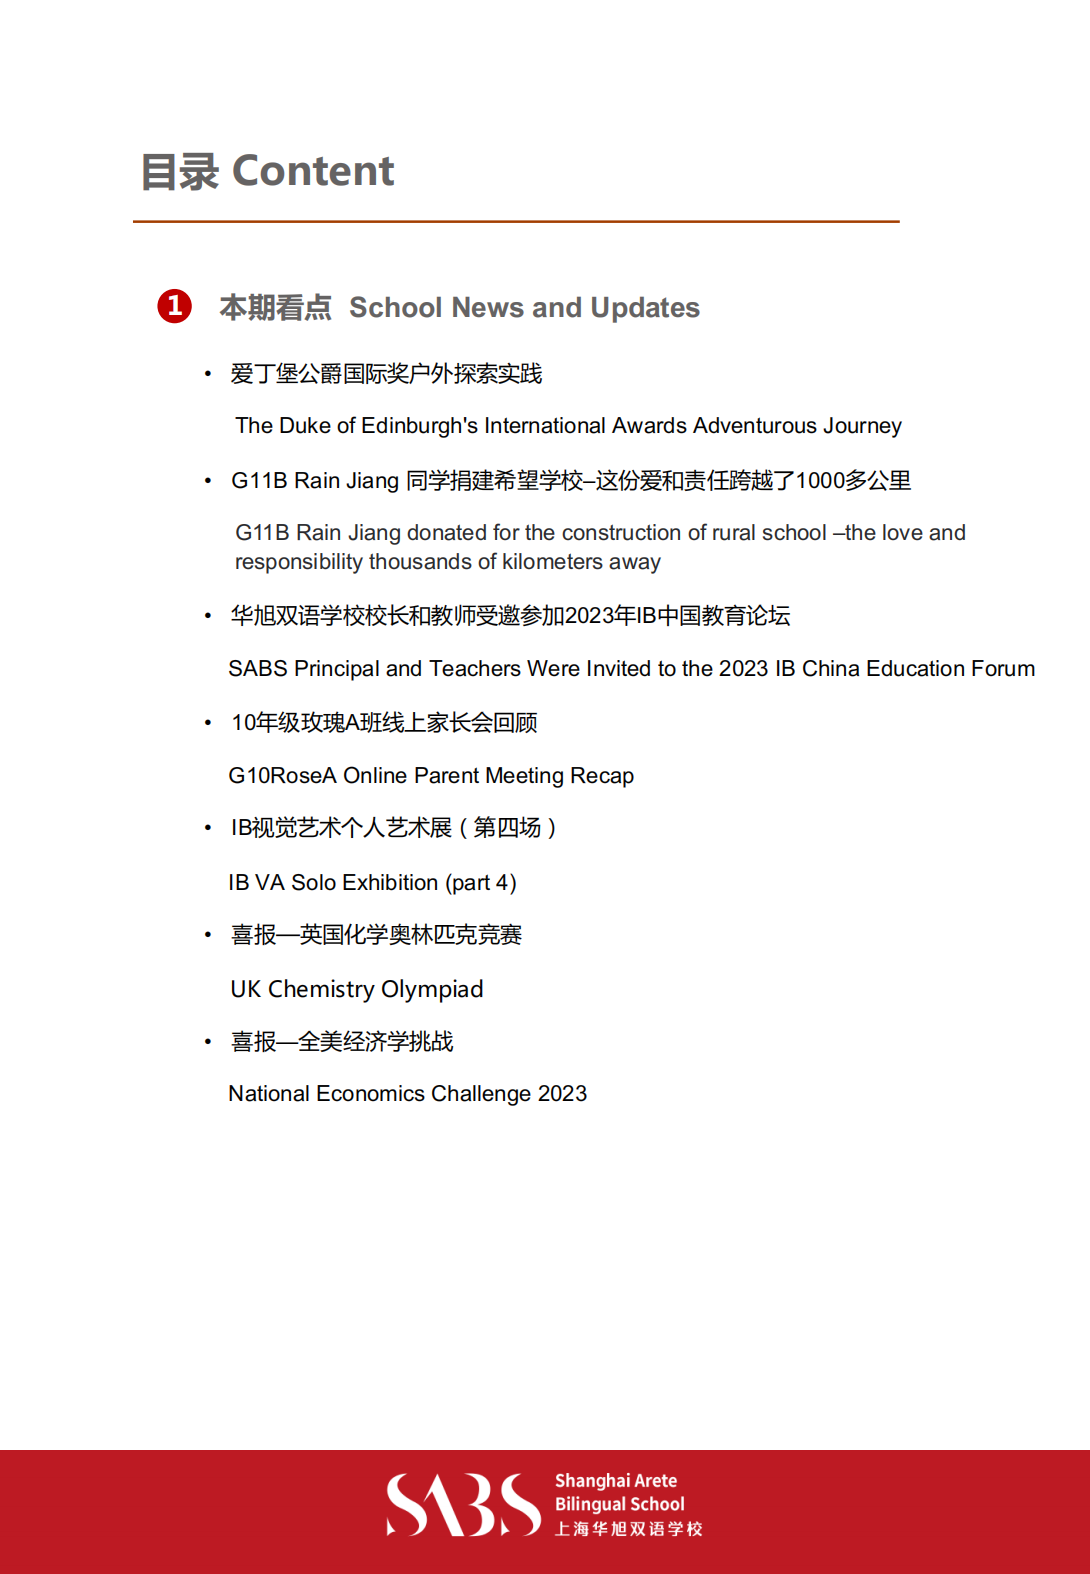 HS 5th Issue Newsletter pptx（English）_01.png